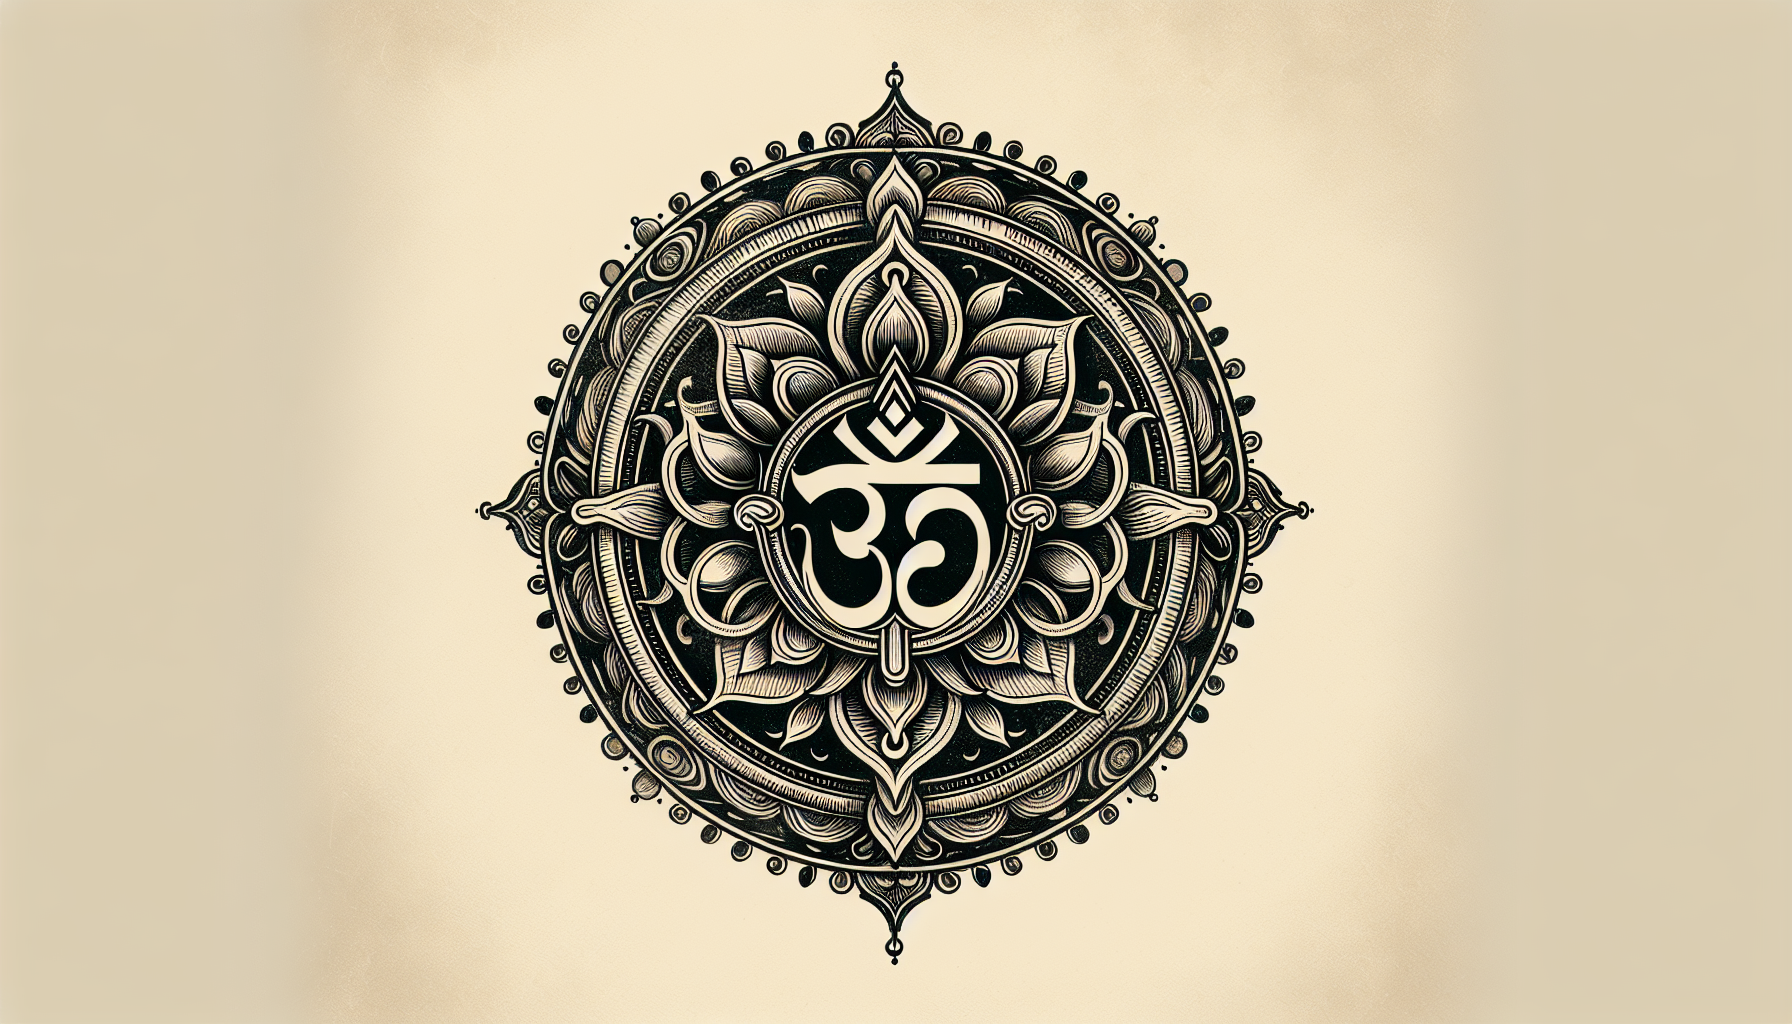 What Is The Hindu Symbol For Peace And Harmony?